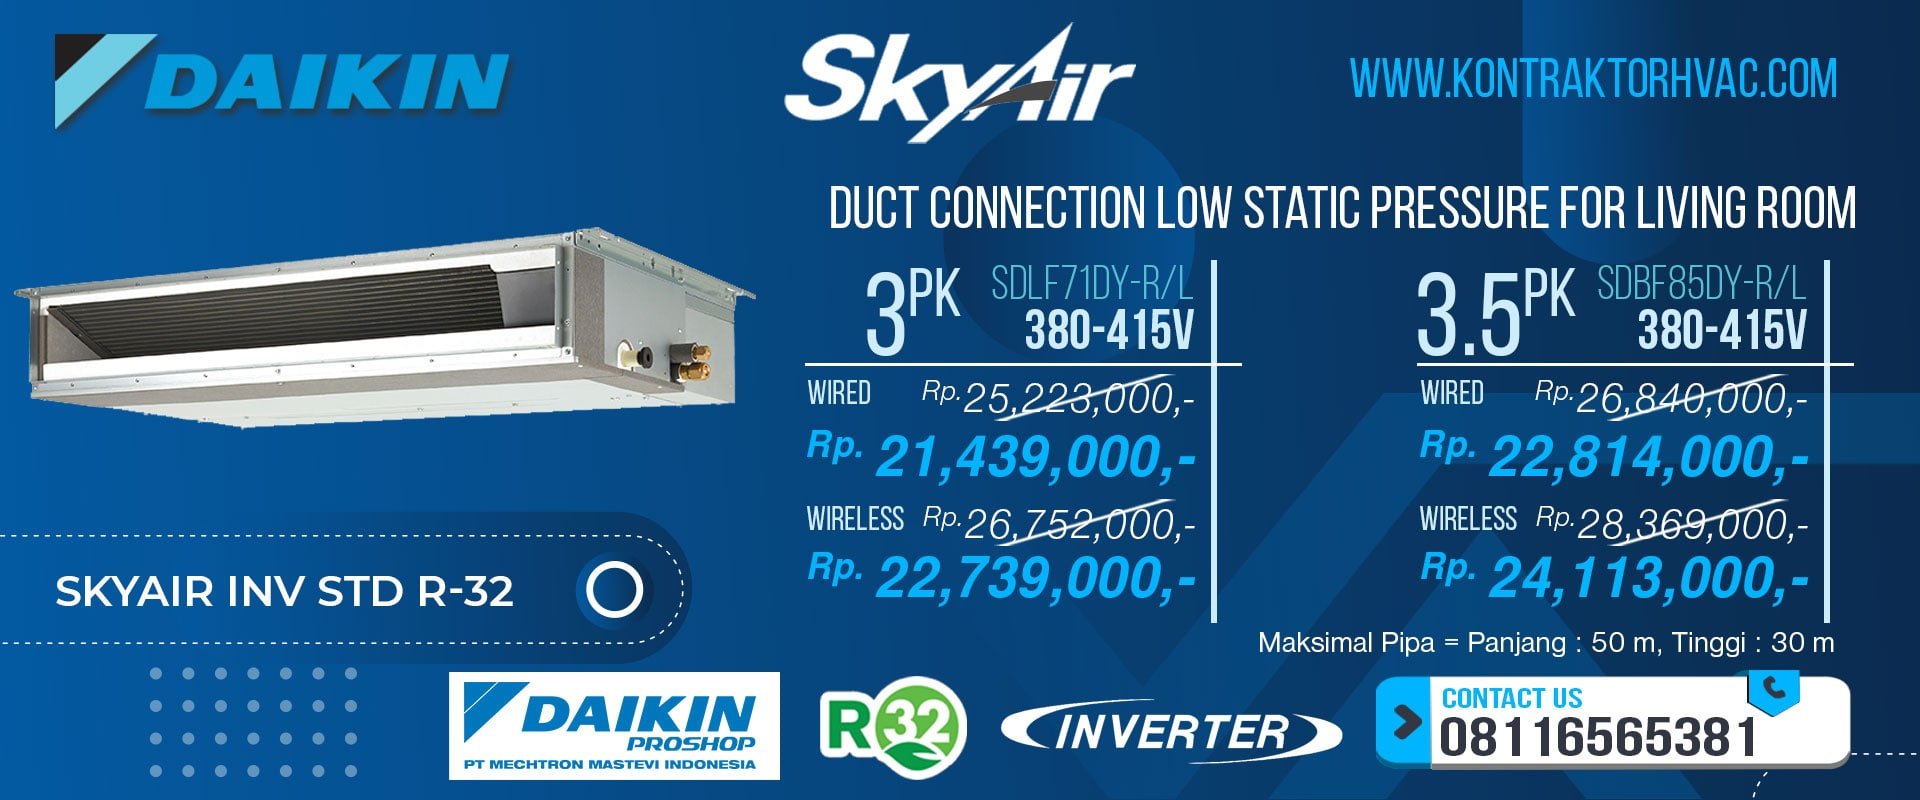 9.Skyair-Inv-STD-R-32-Duct-Connection-Low-Static-Pressure-For-Living-Room-y-min